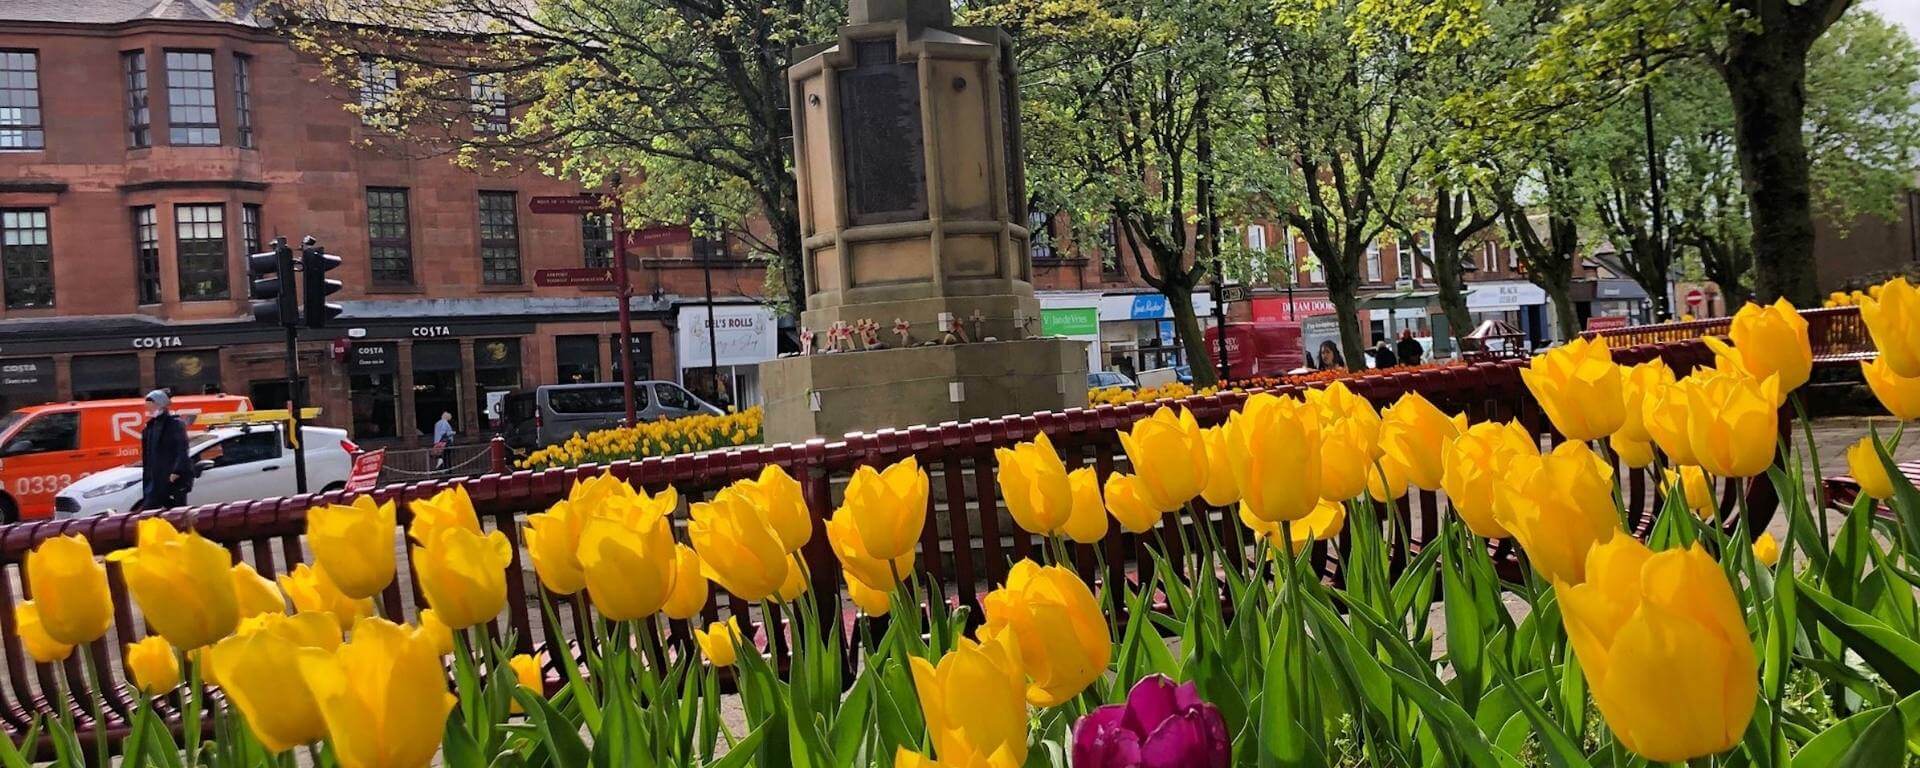 View of tulips in bloom next to memorial statue.